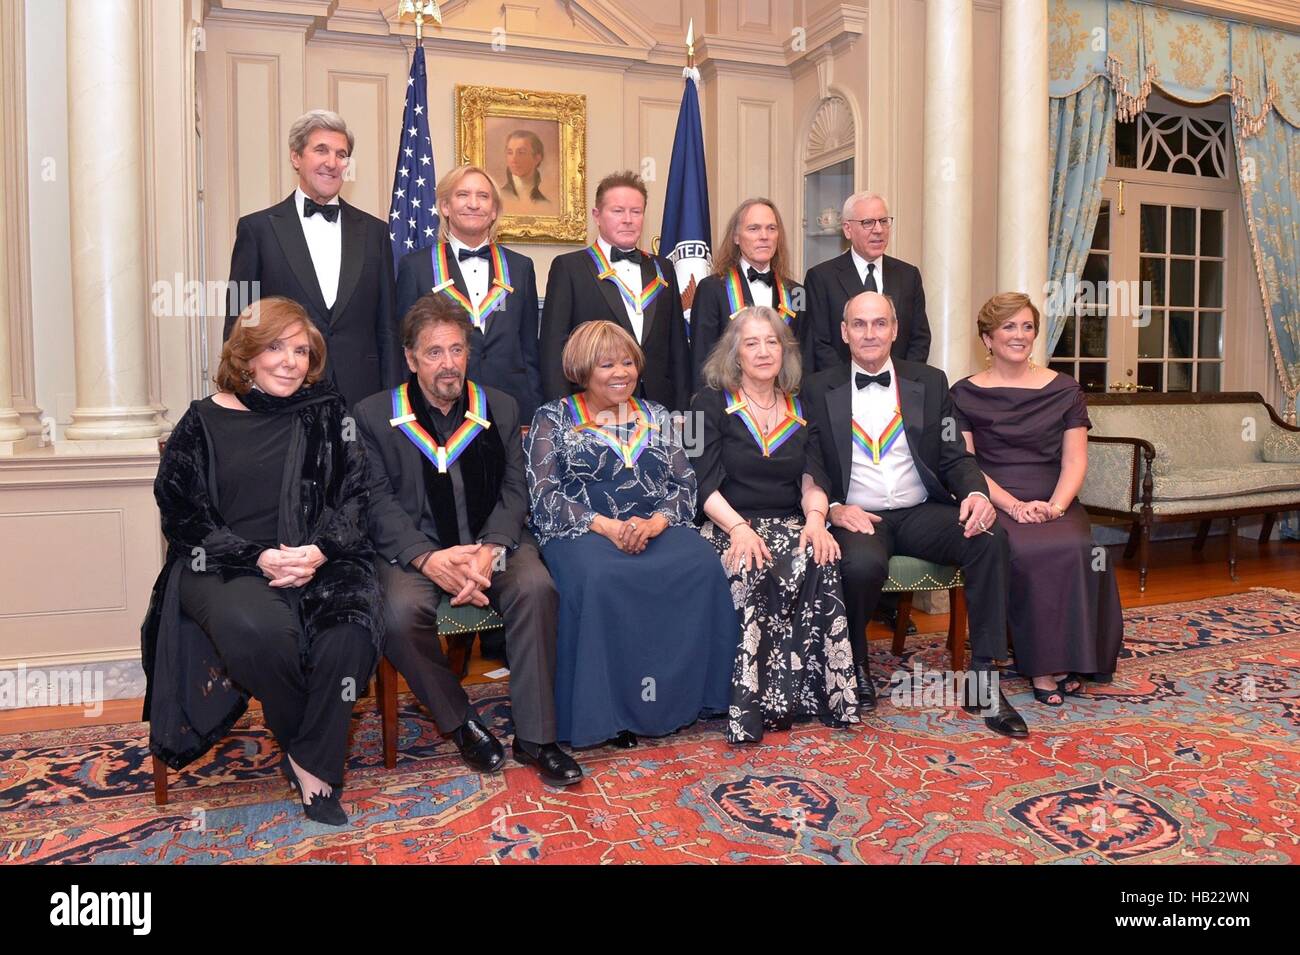 Washington DC, USA. 3rd Dec, 2016. U.S Secretary of State John Kerry and his wife Teresa Heinz Kerry pose for a group photo with the 2016 Kennedy Center Honor Award recipients following the gala dinner at the Department of State December 3, 2016 in Washington, DC. First row left to right are: Teresa Heinz Kerry, Al Pacino, Mavis Staples, Martha Argerich, James Taylor, and Kennedy Center President Deborah Rutter; back row, from left, Secretary of State John Kerry, Joe Walsh, Don Henley, Timothy Schmit, and David Rubinstein. Credit:  Planetpix/Alamy Live News Stock Photo